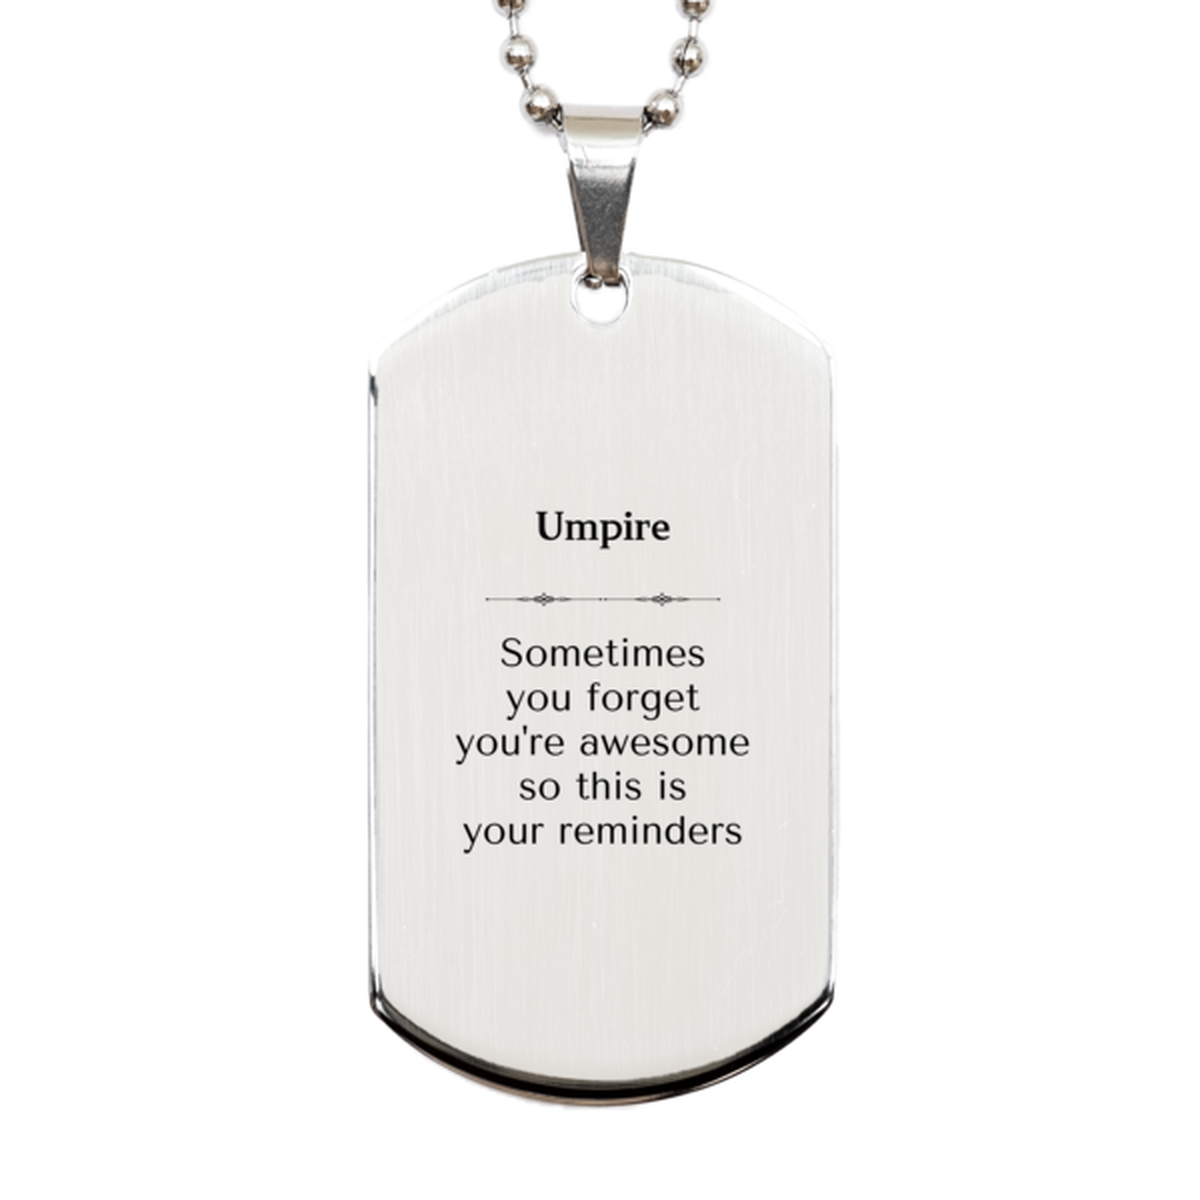 Sentimental Umpire Silver Dog Tag, Umpire Sometimes you forget you're awesome so this is your reminders, Graduation Christmas Birthday Gifts for Umpire, Men, Women, Coworkers